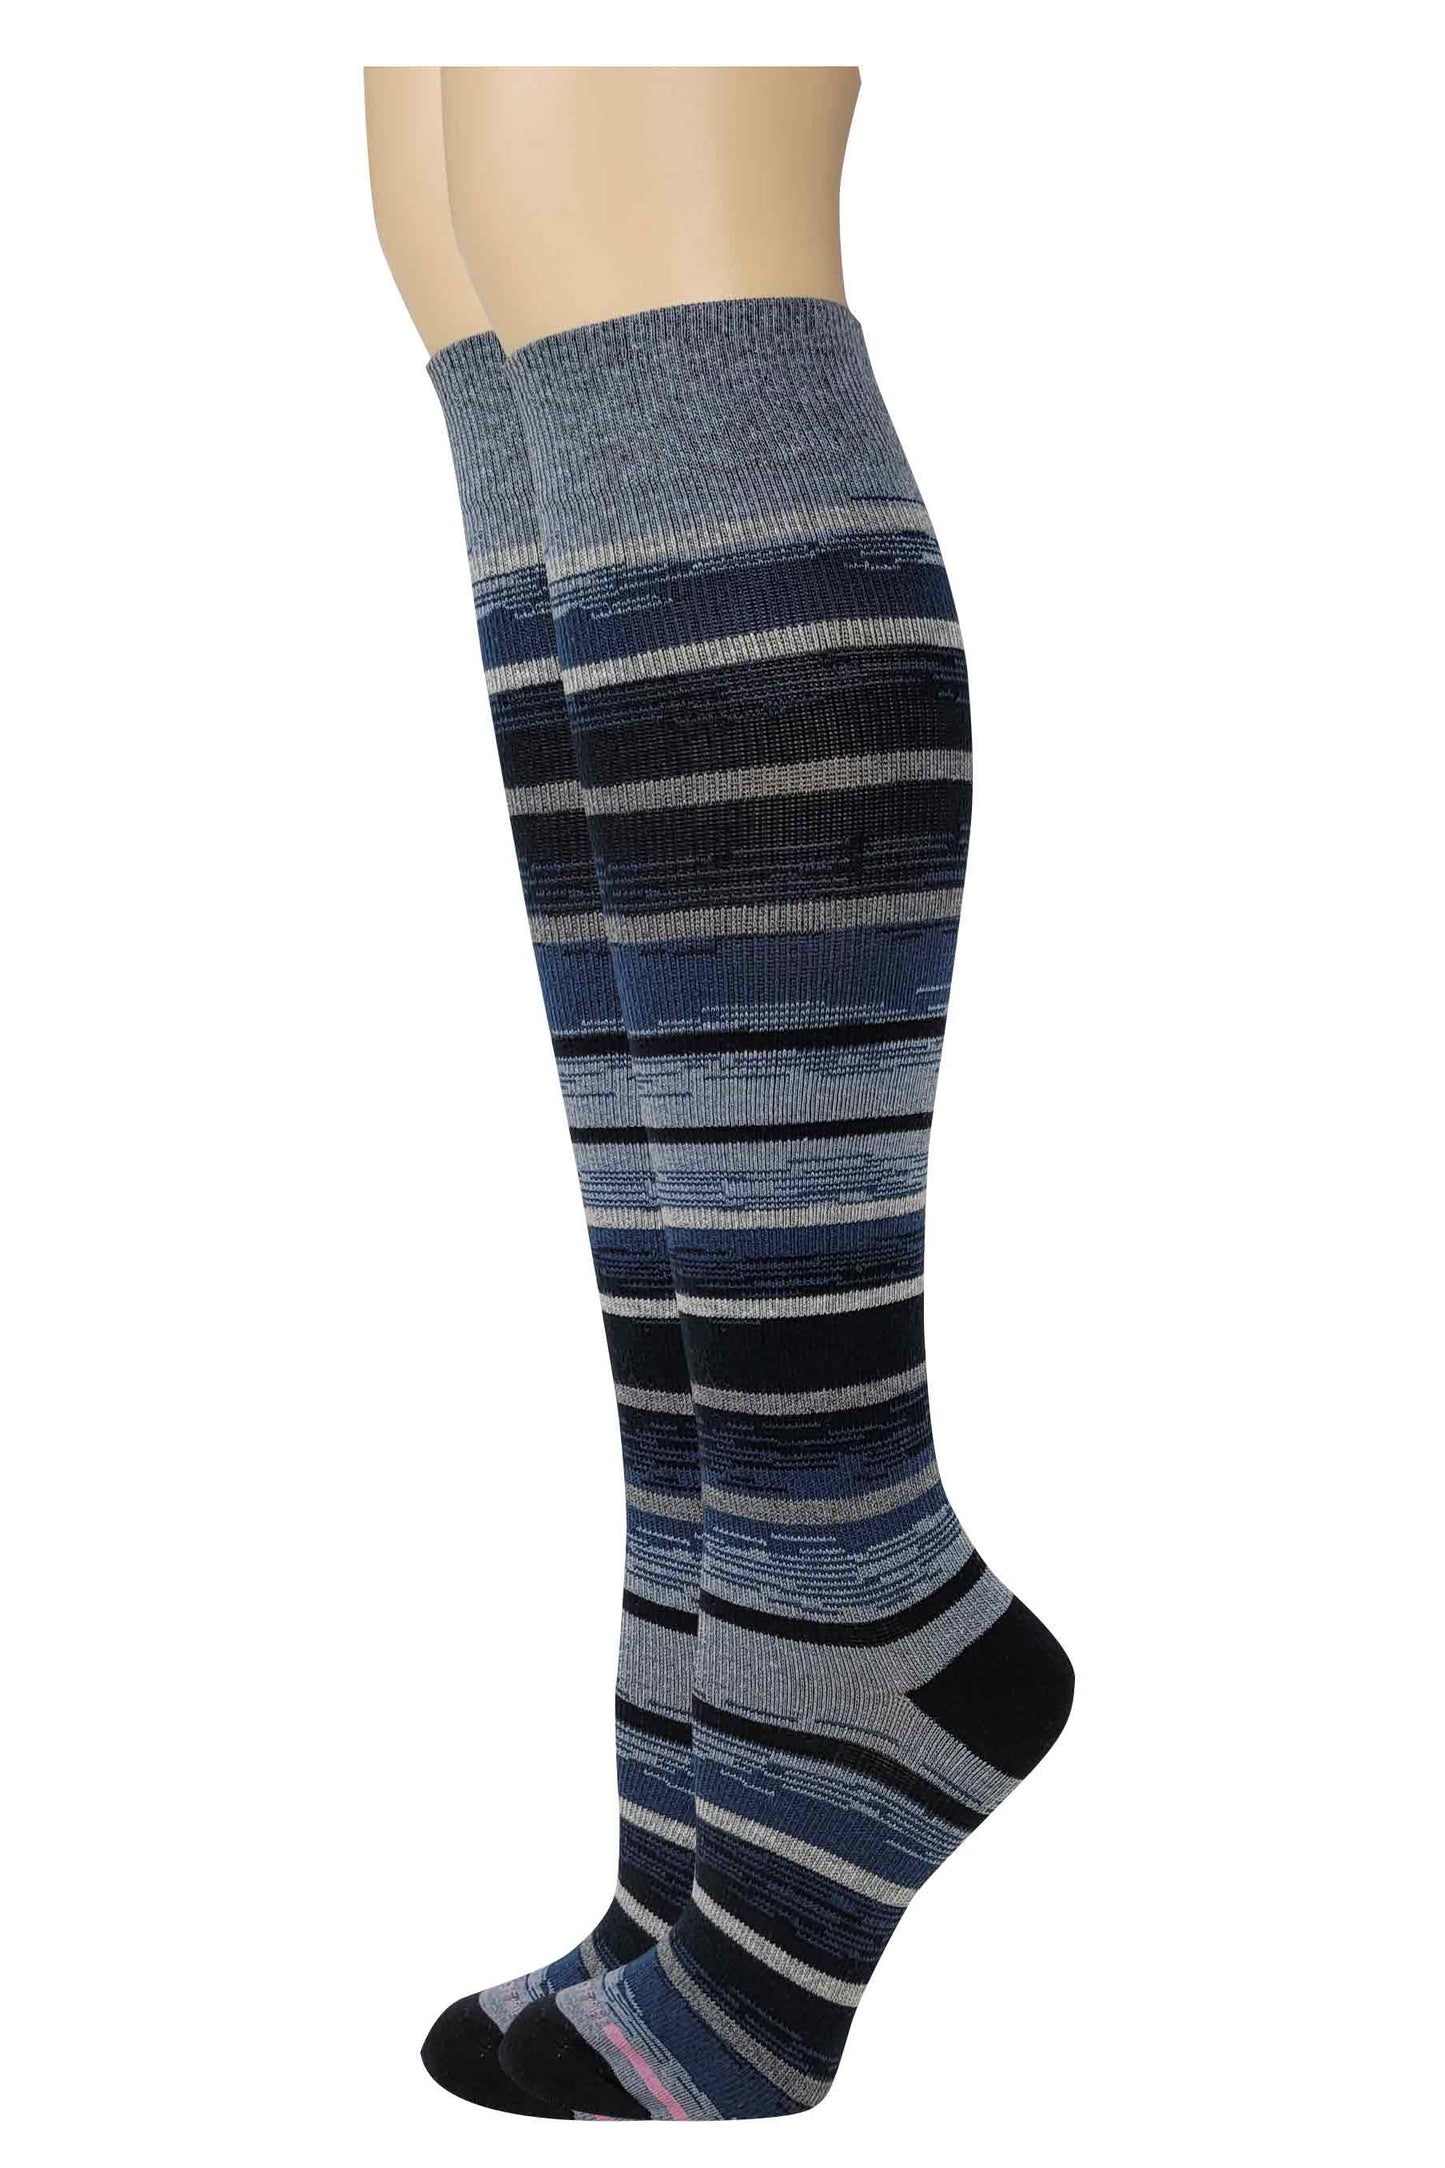 Knee High Compression Socks | Ombre Design | Women's (1 Pair)